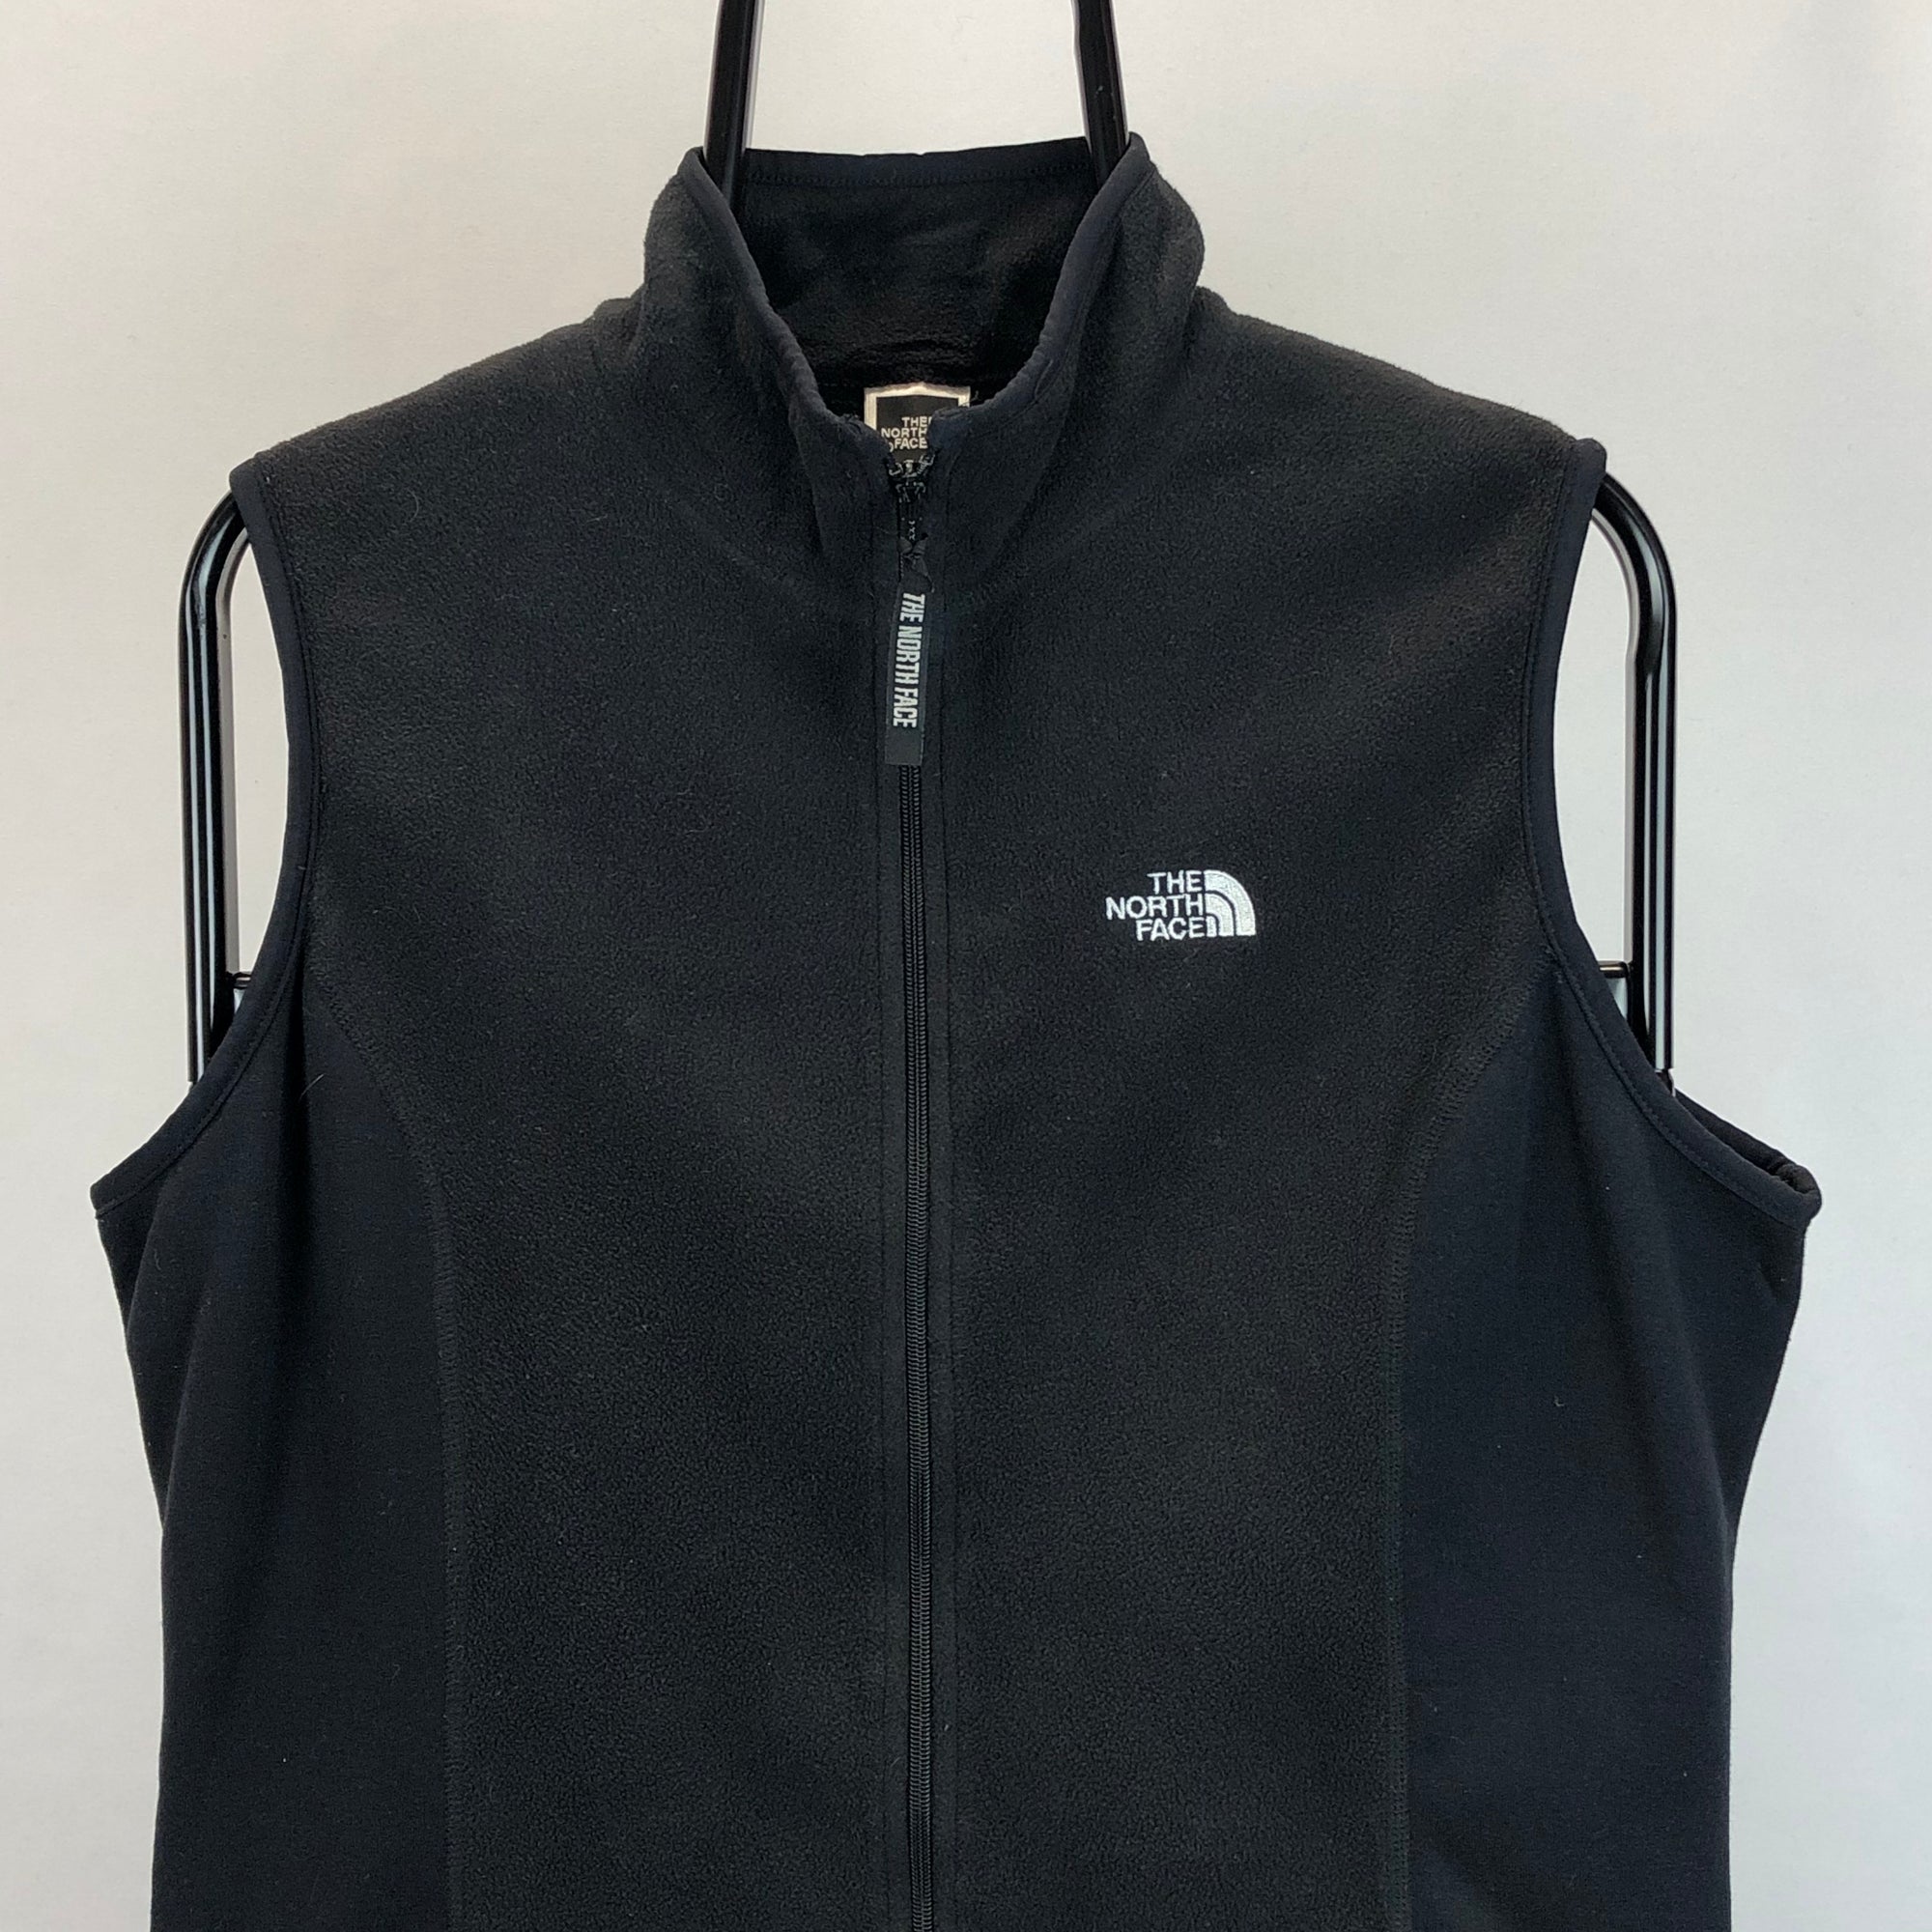 The North Face Fleece Gilet in Black - Men's Small/Women's Large